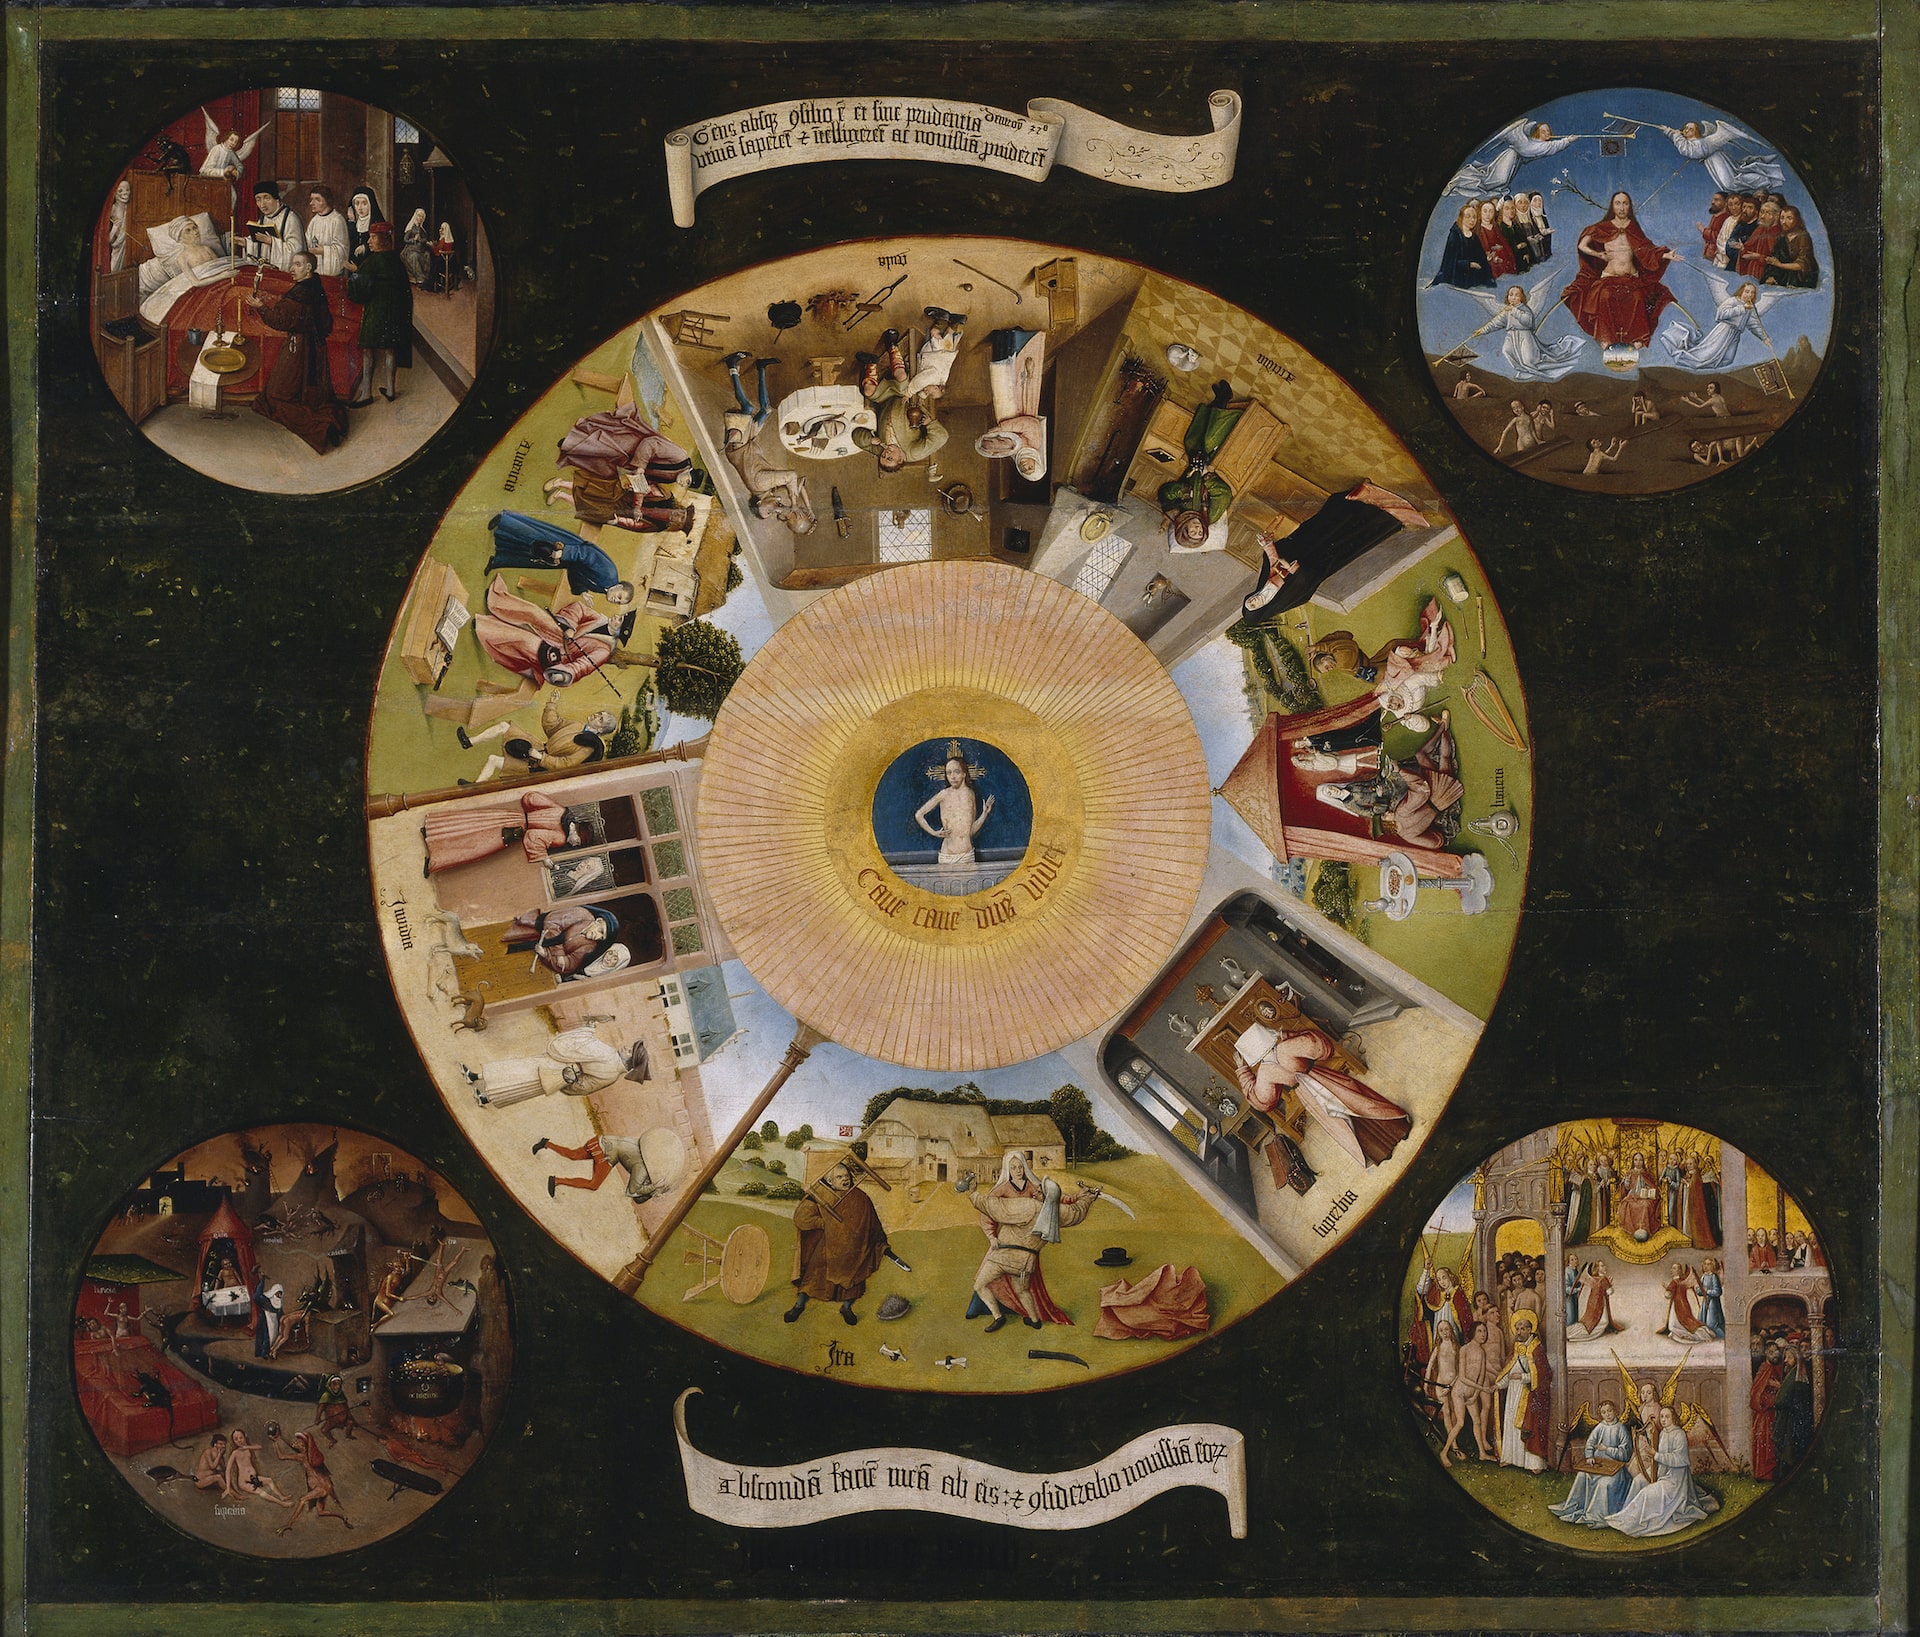 "The Seven Deadly Sins and the Four Last Things" by Hieronymus Bosch. (Source: Wikimedia Commons)